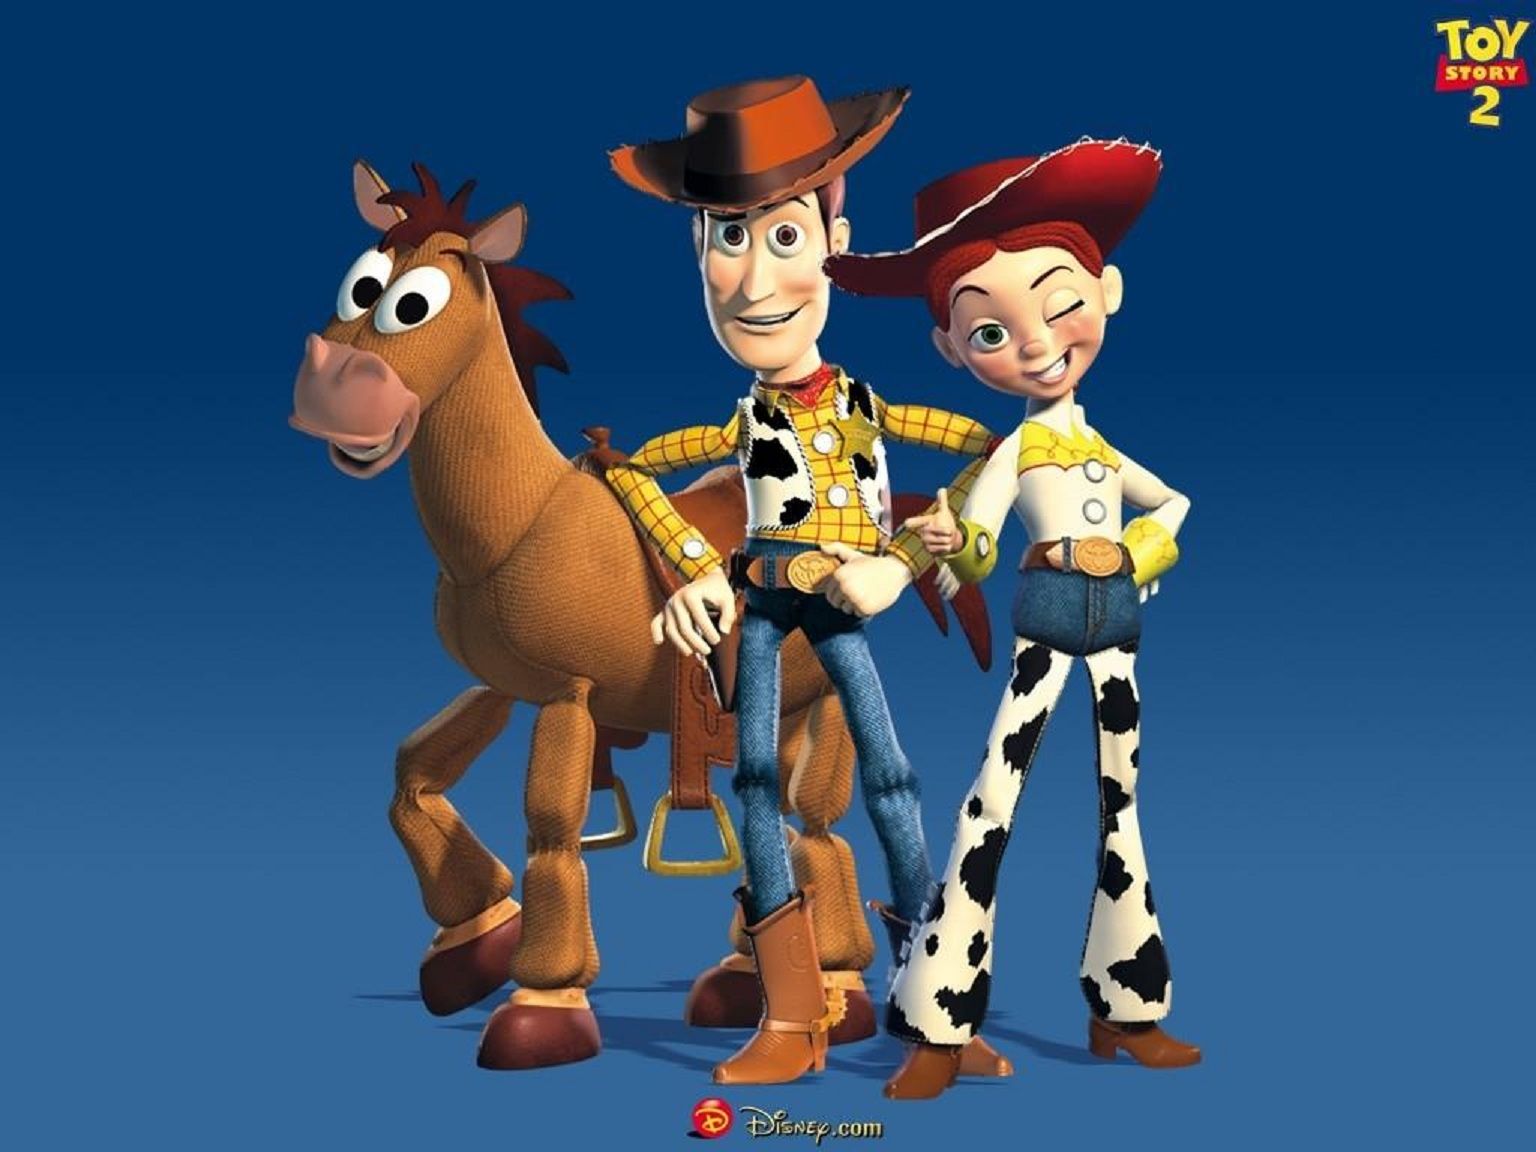 Disney HD Wallpapers: Toy Story HD Wallpapers